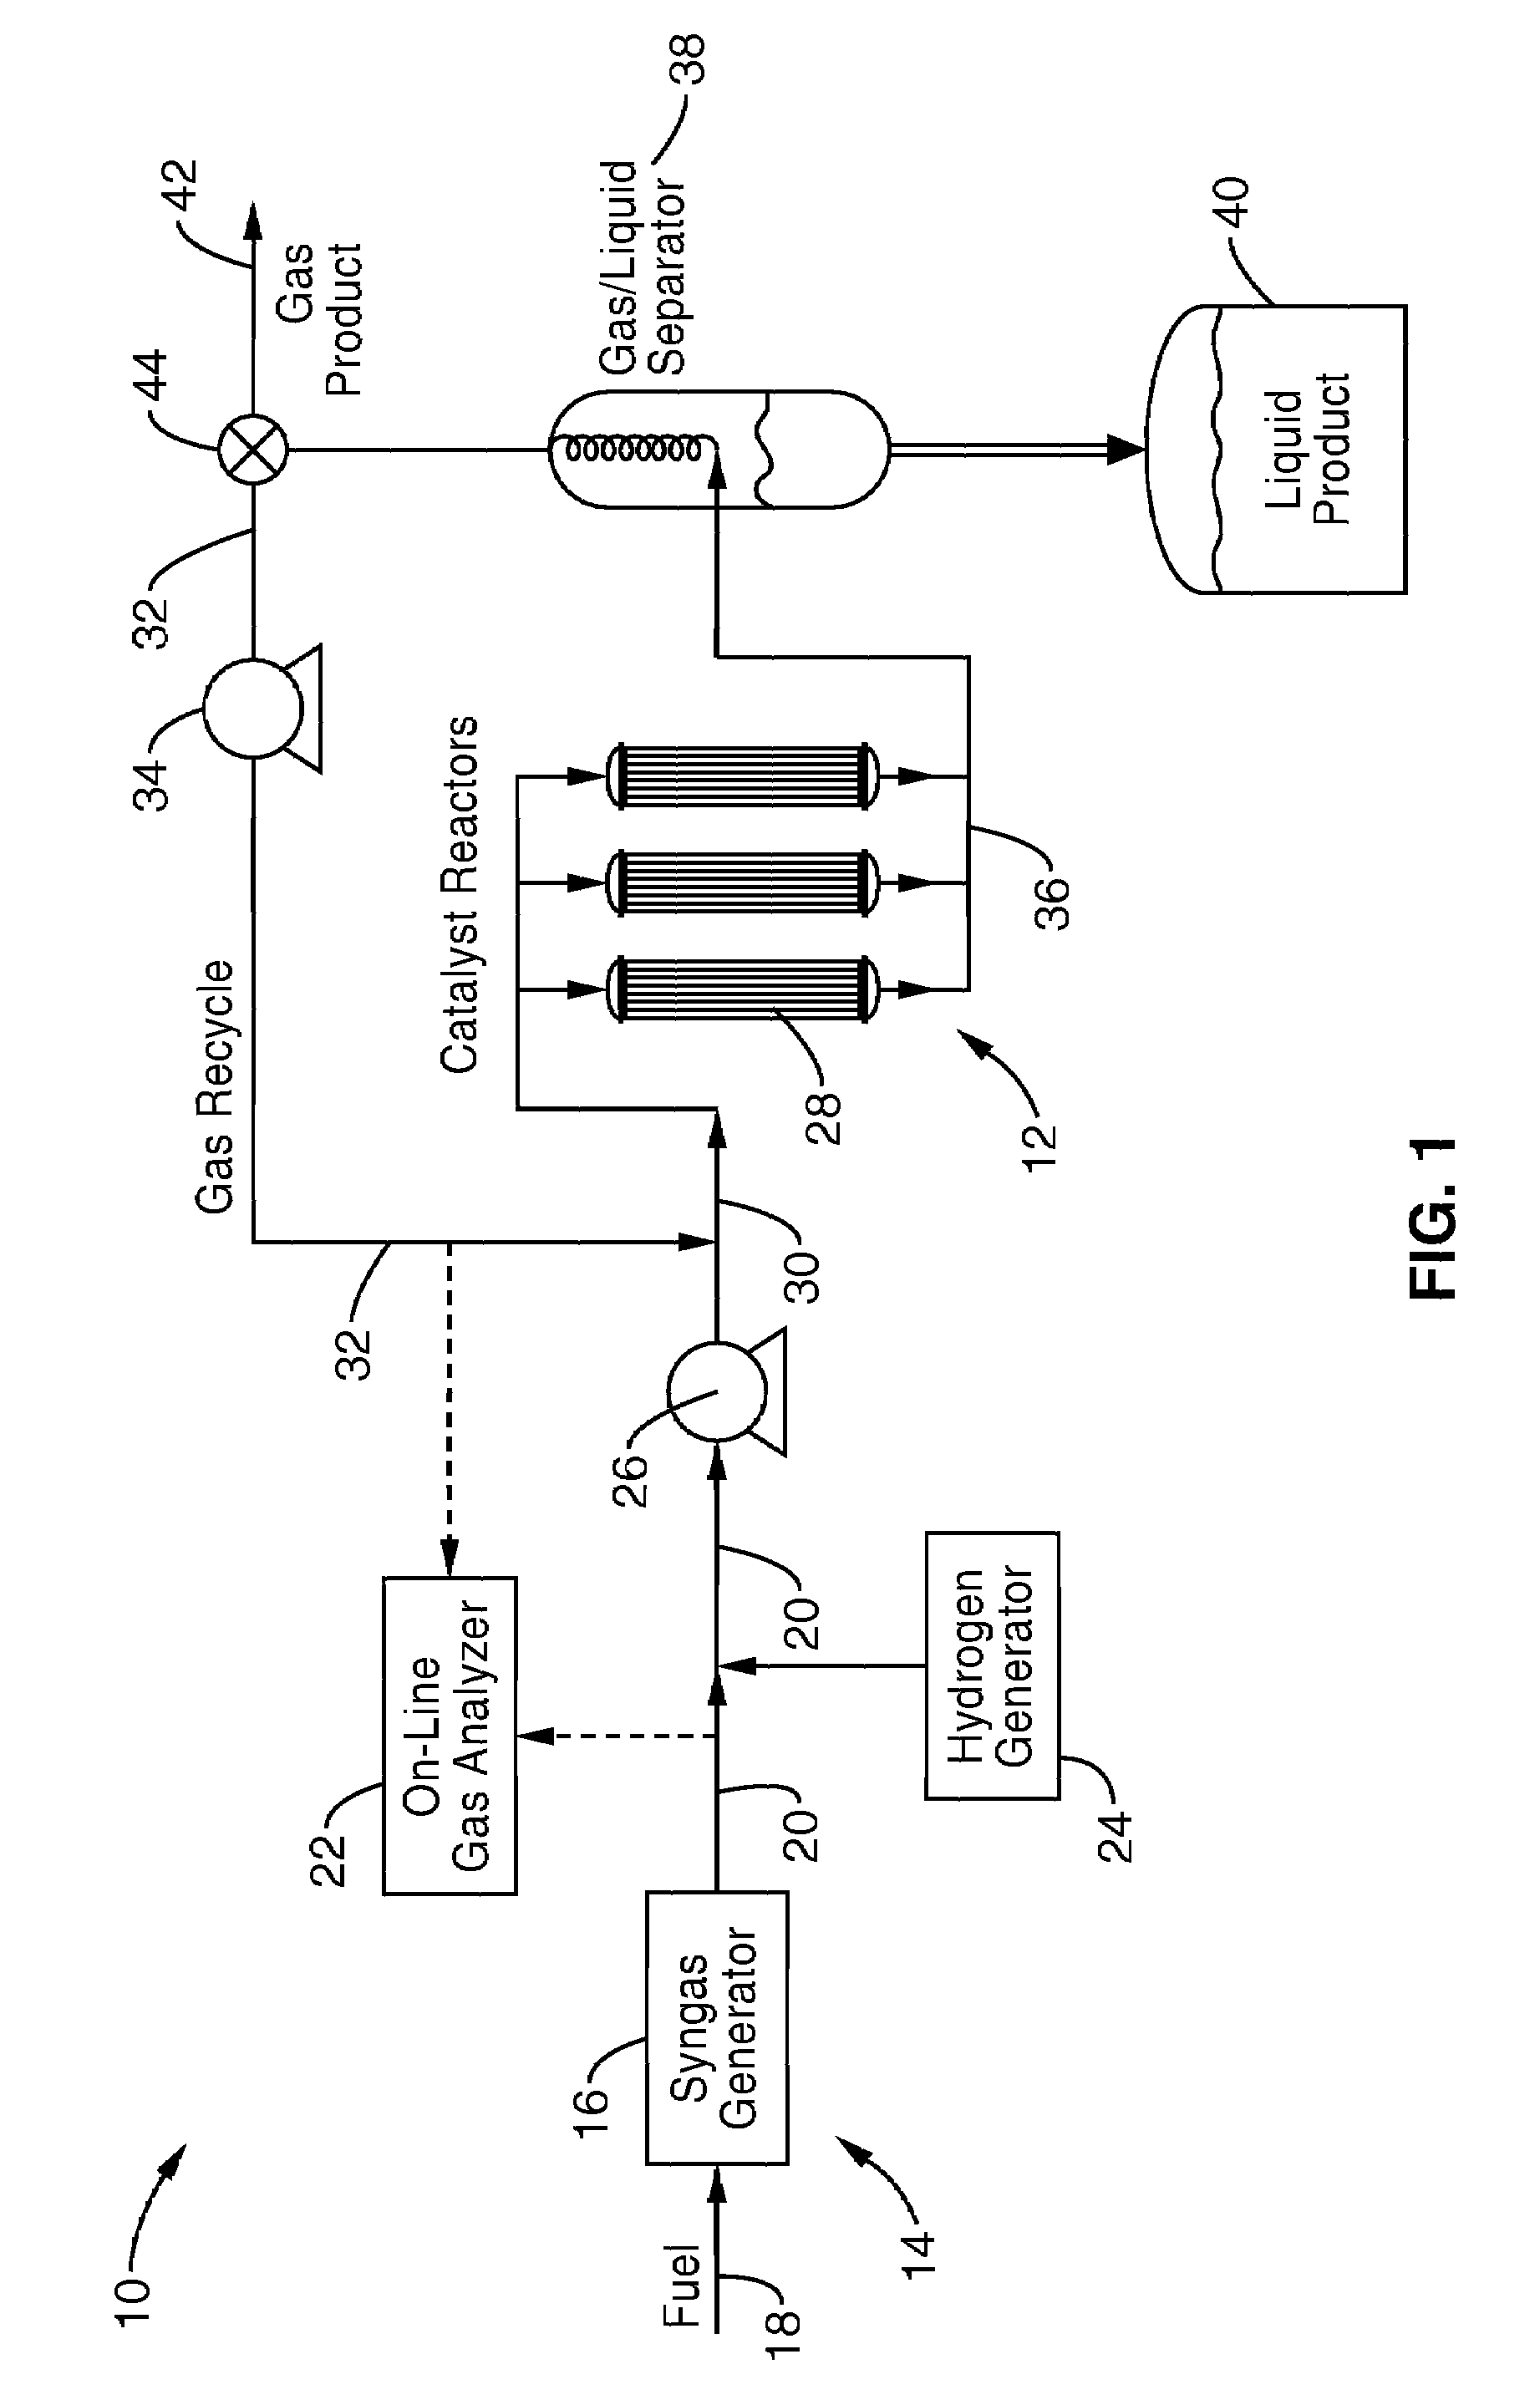 Energy efficient system and process for the continuous production of fuels and energy from syngas